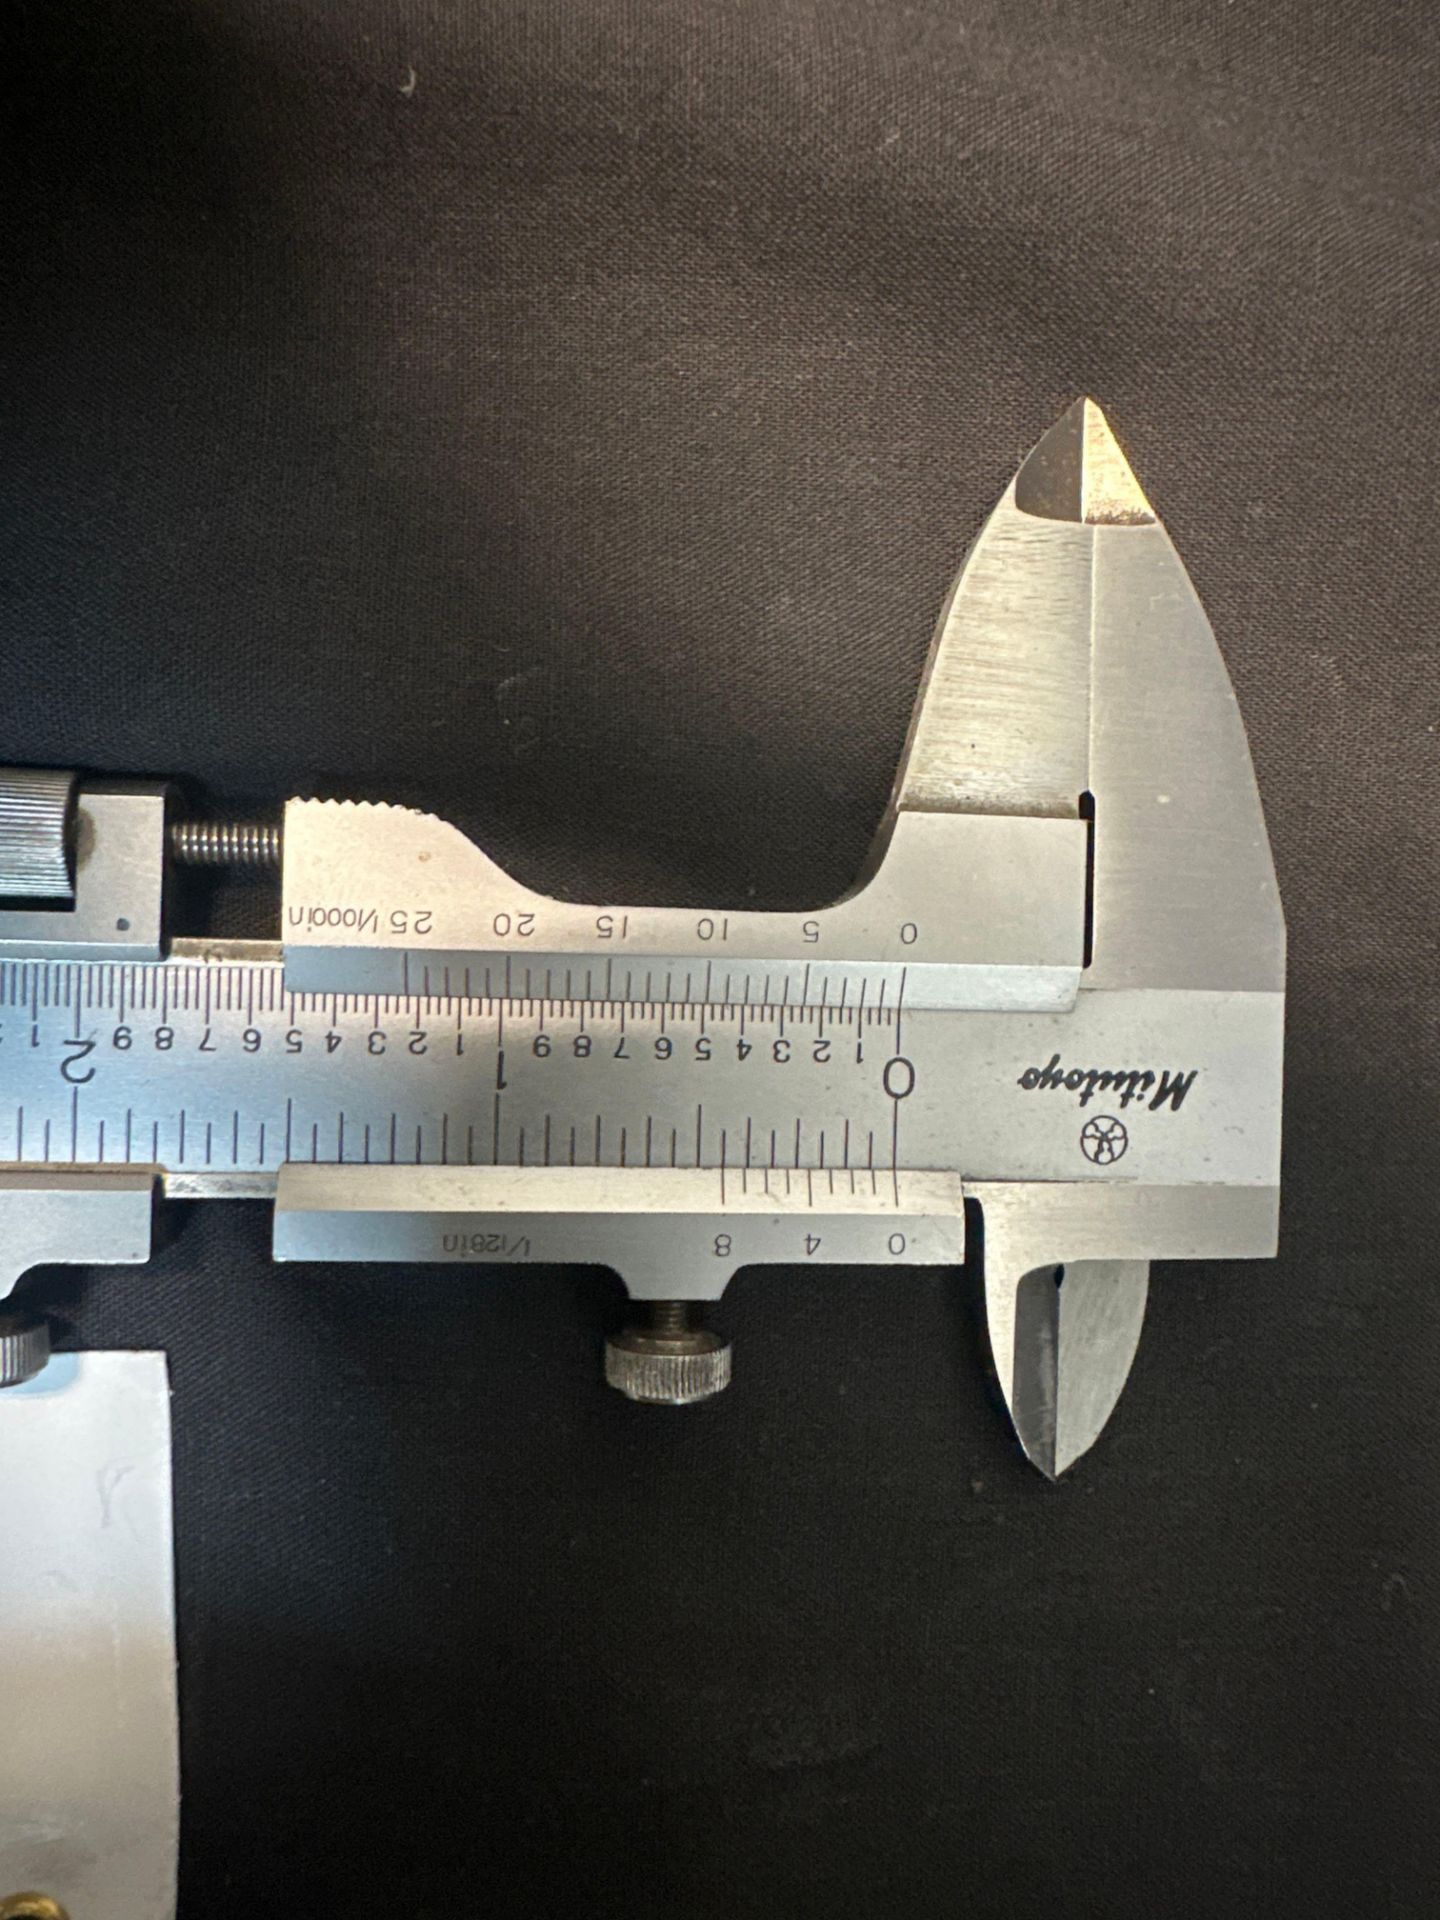 0 - 7” Mitutoyo Stainless Steel Caliper - Image 2 of 4